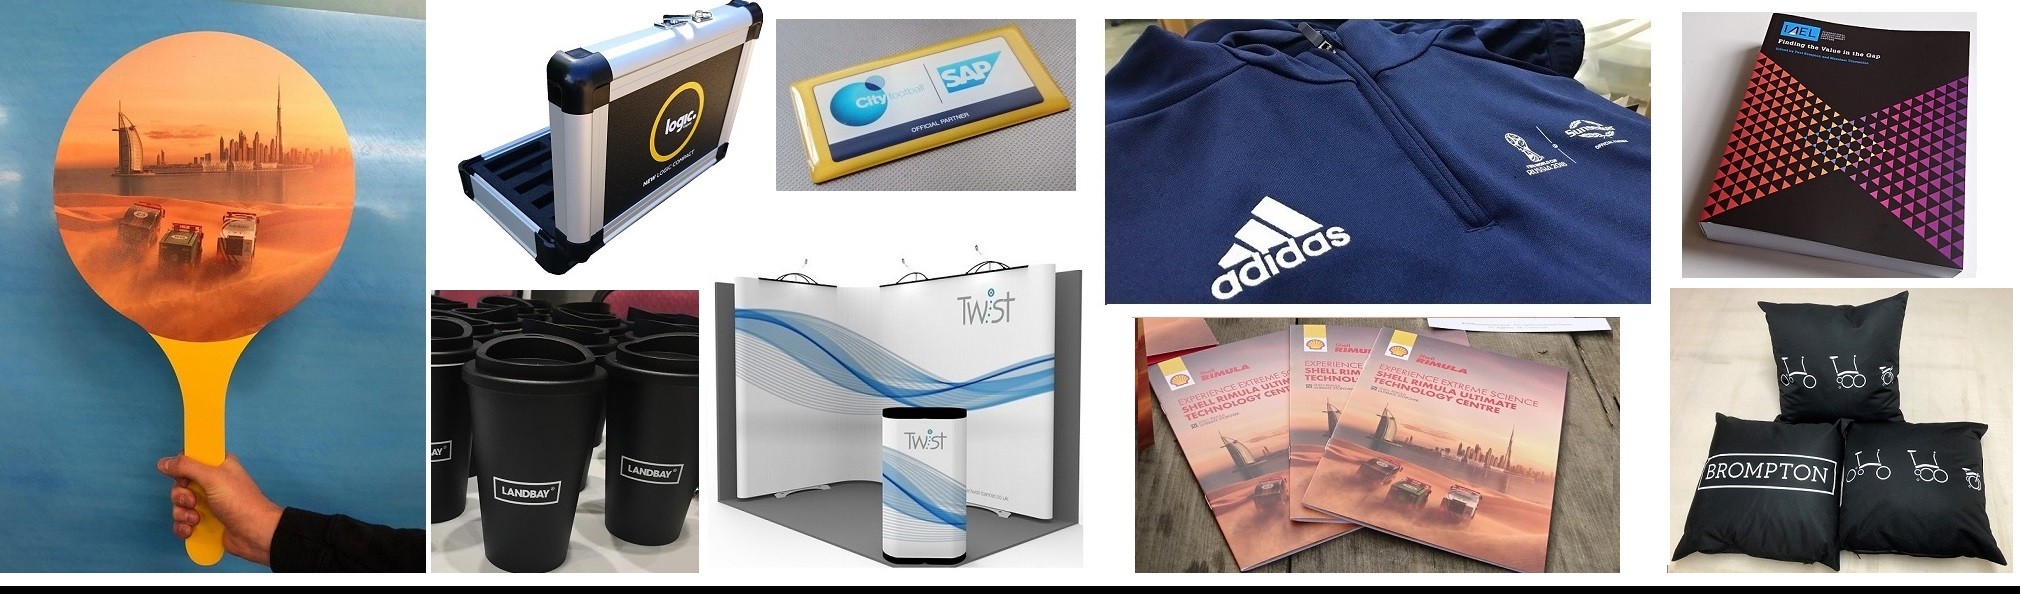 Slideshow Brochures Signs Bags Clothing Coffee Cups